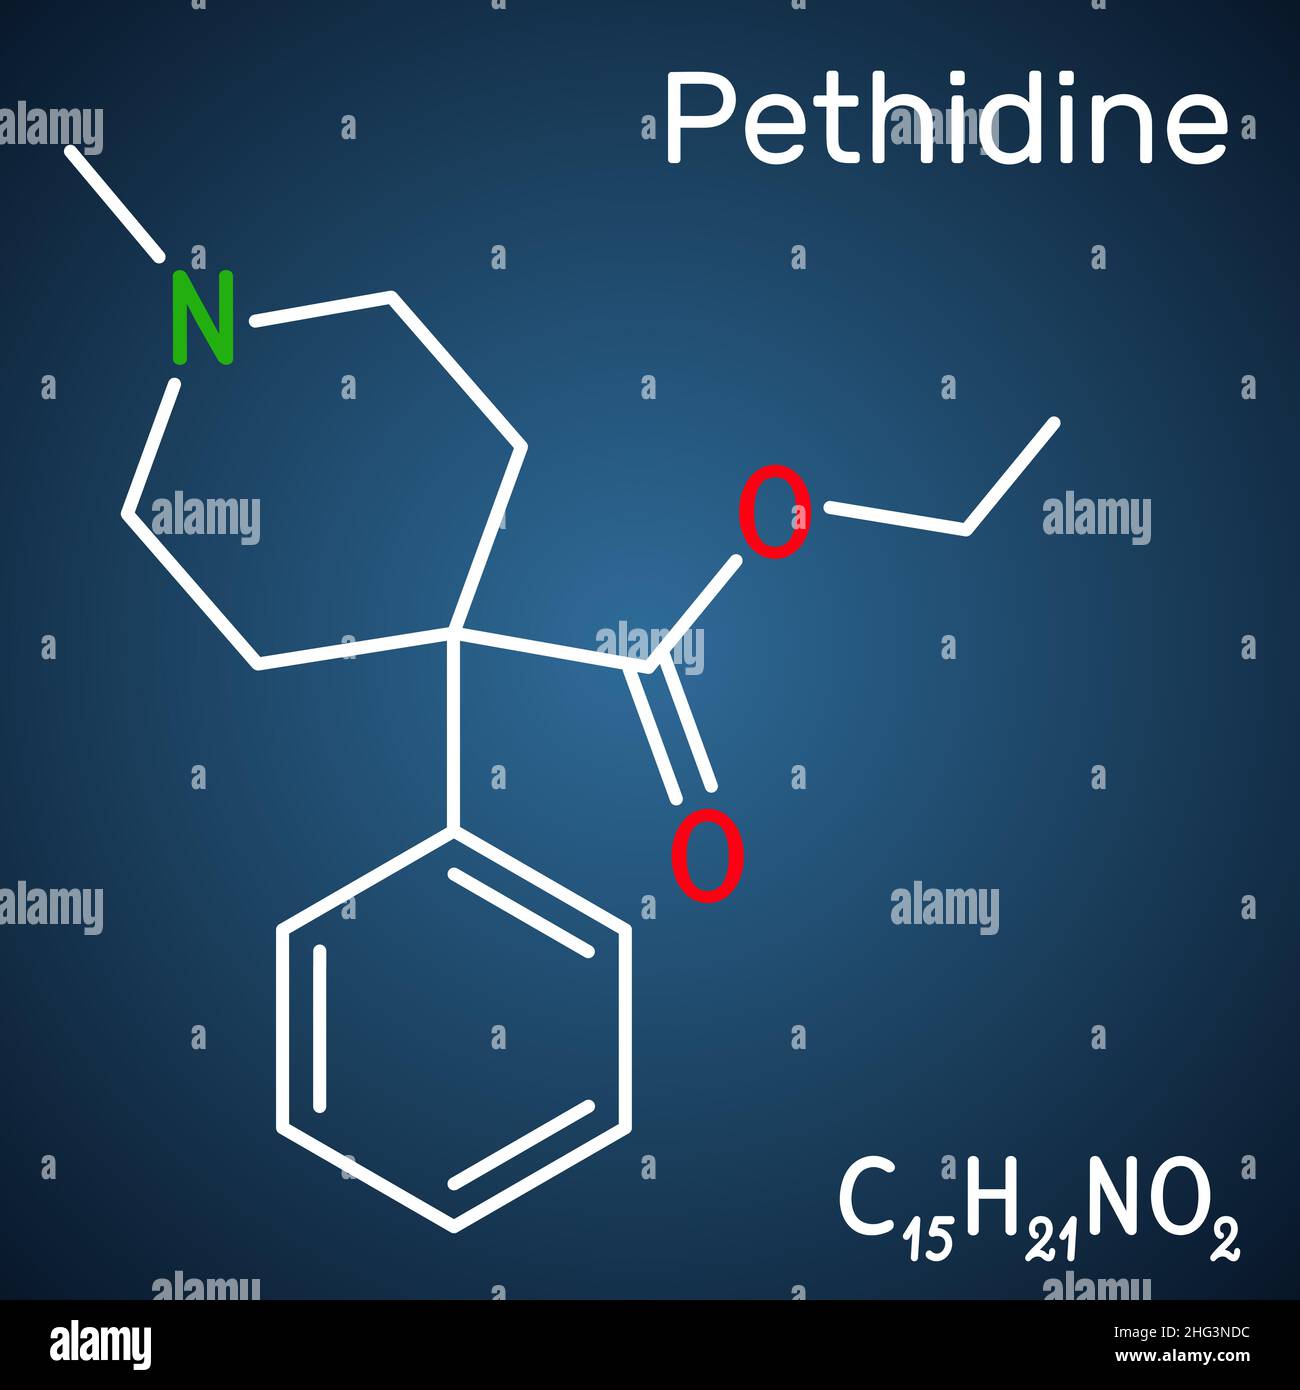 Pethidine, meperidin molecule. It is opioid agonist with analgesic and sedative properties used to manage moderate-to-severe pain. Structural chemical Stock Vector